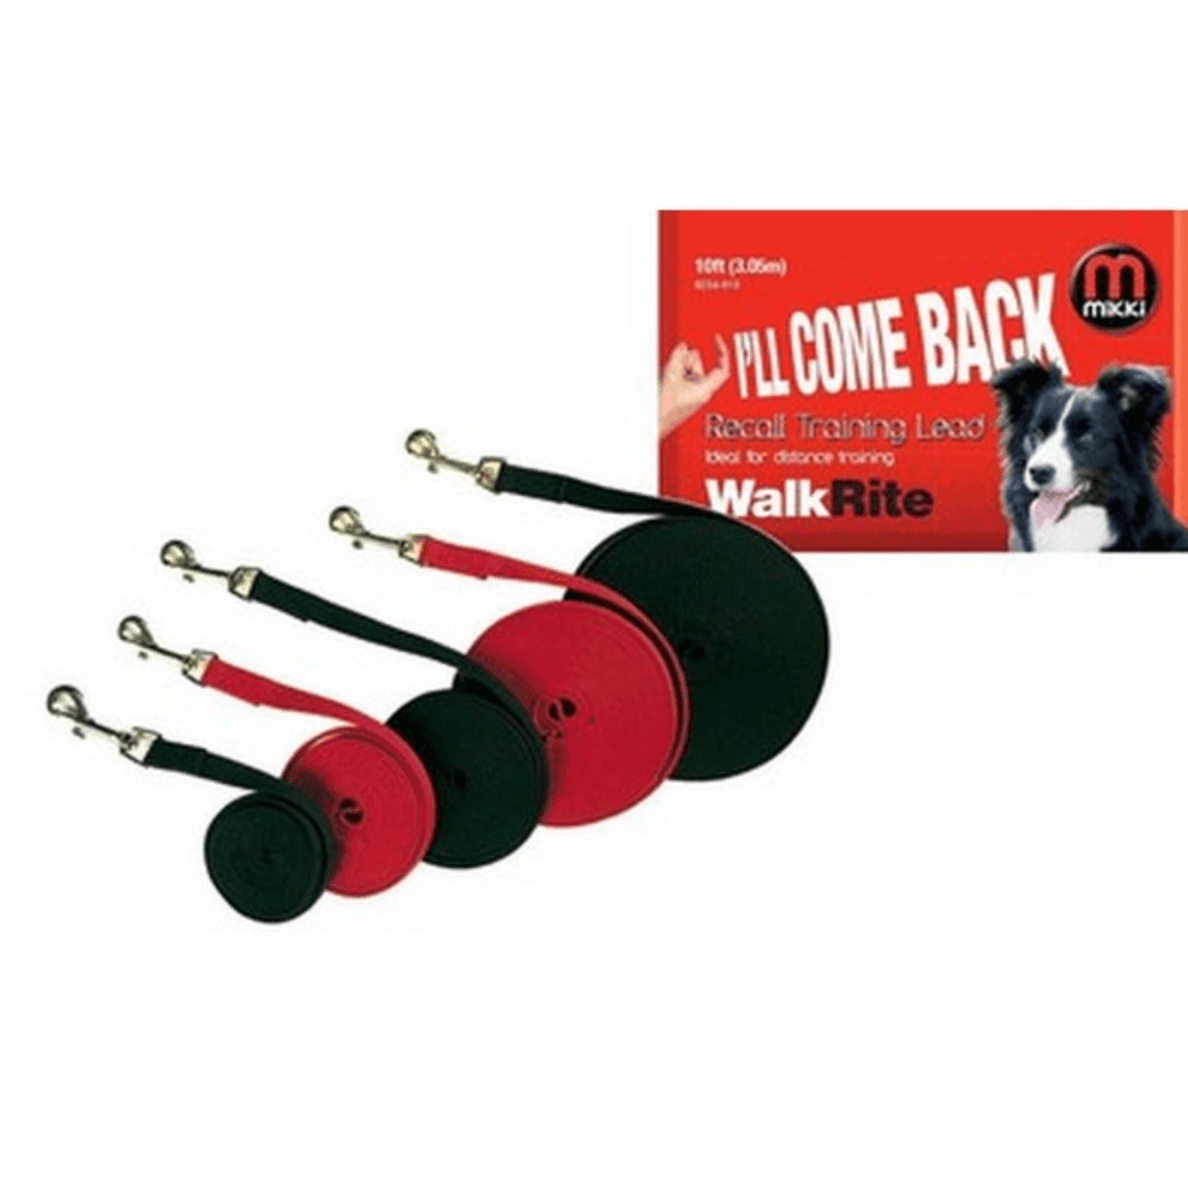 Mikki Recall Dog Training Lead (Various Lengths) - Pet's Play Toy Store